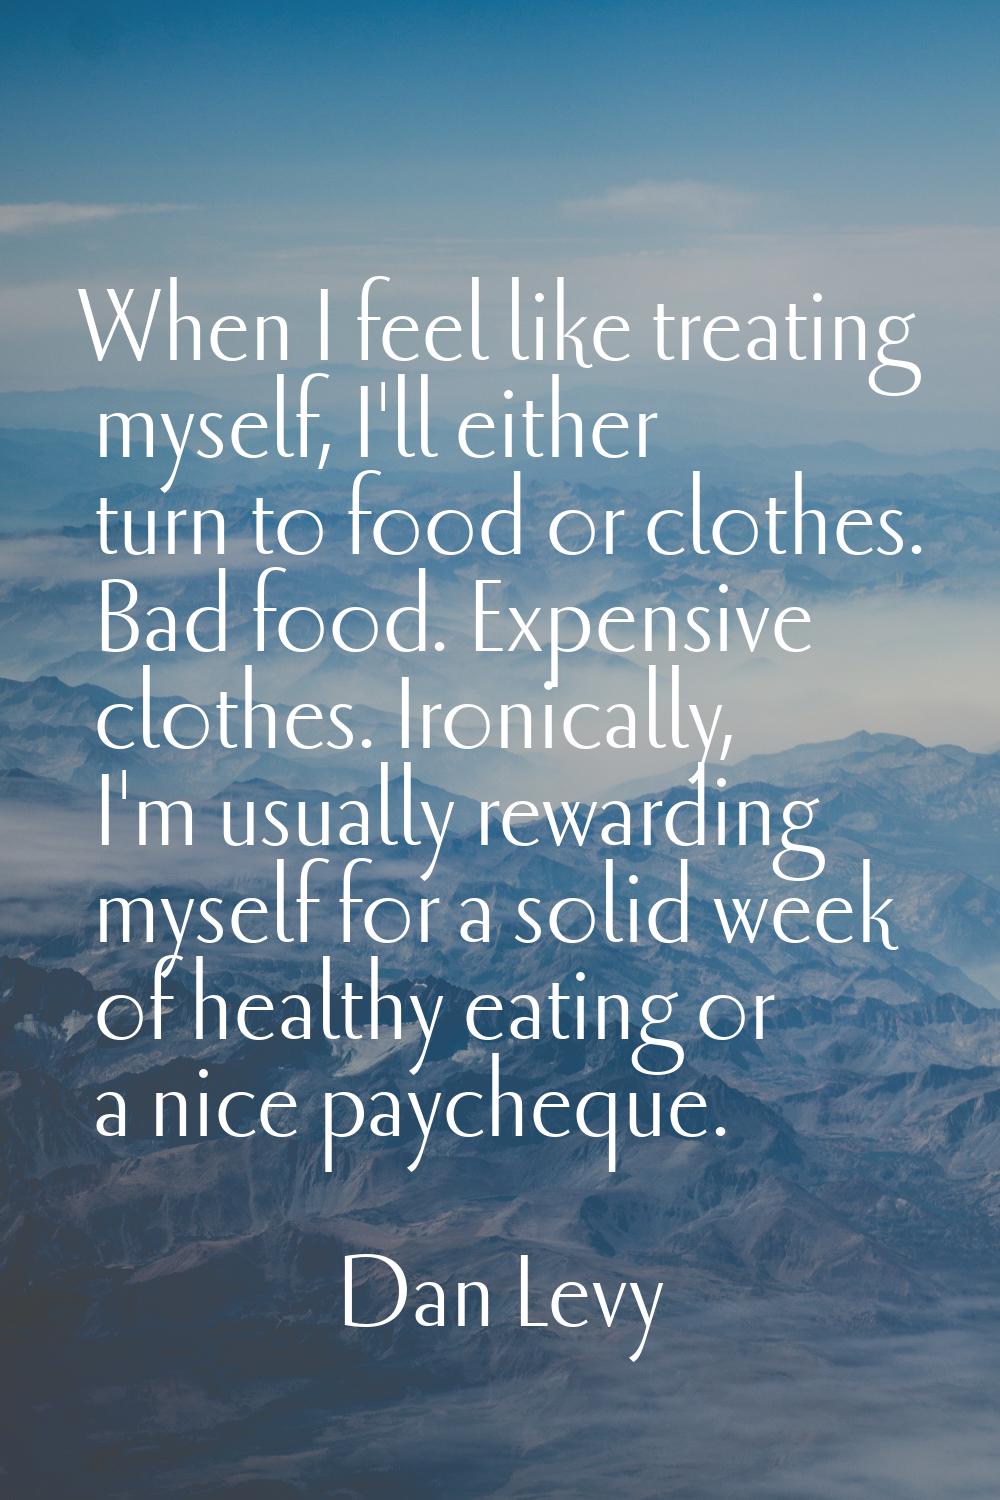 When I feel like treating myself, I'll either turn to food or clothes. Bad food. Expensive clothes.